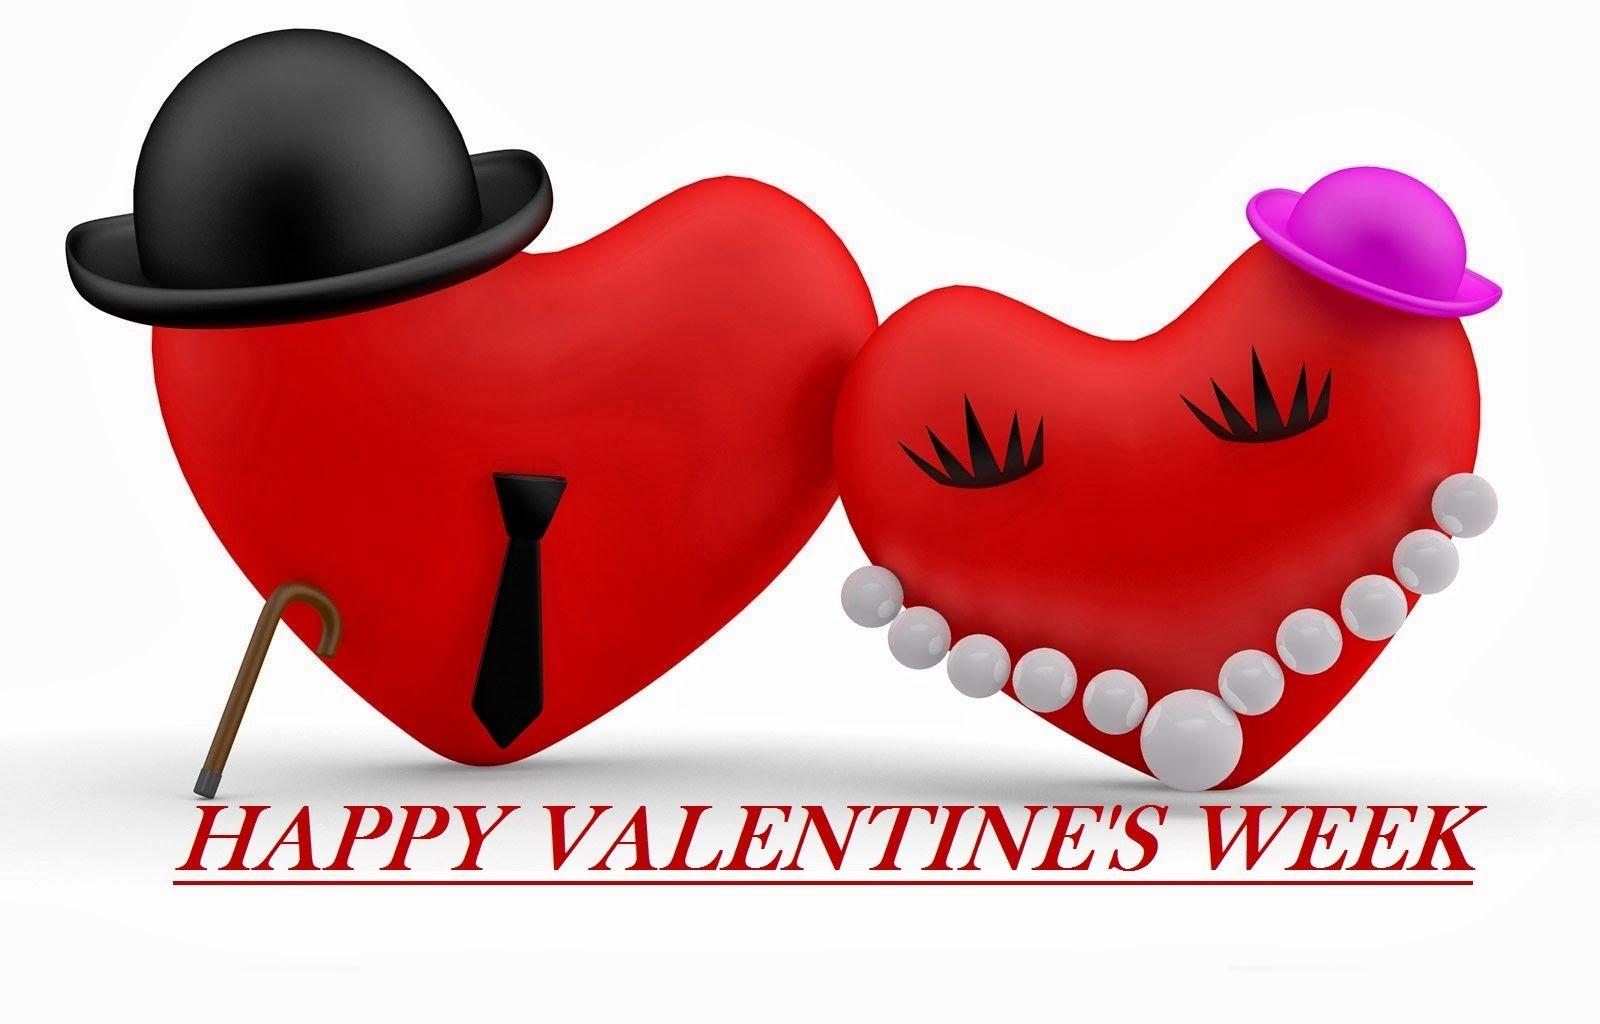 Happy Valentine's Week 2014 special: All details about each day of